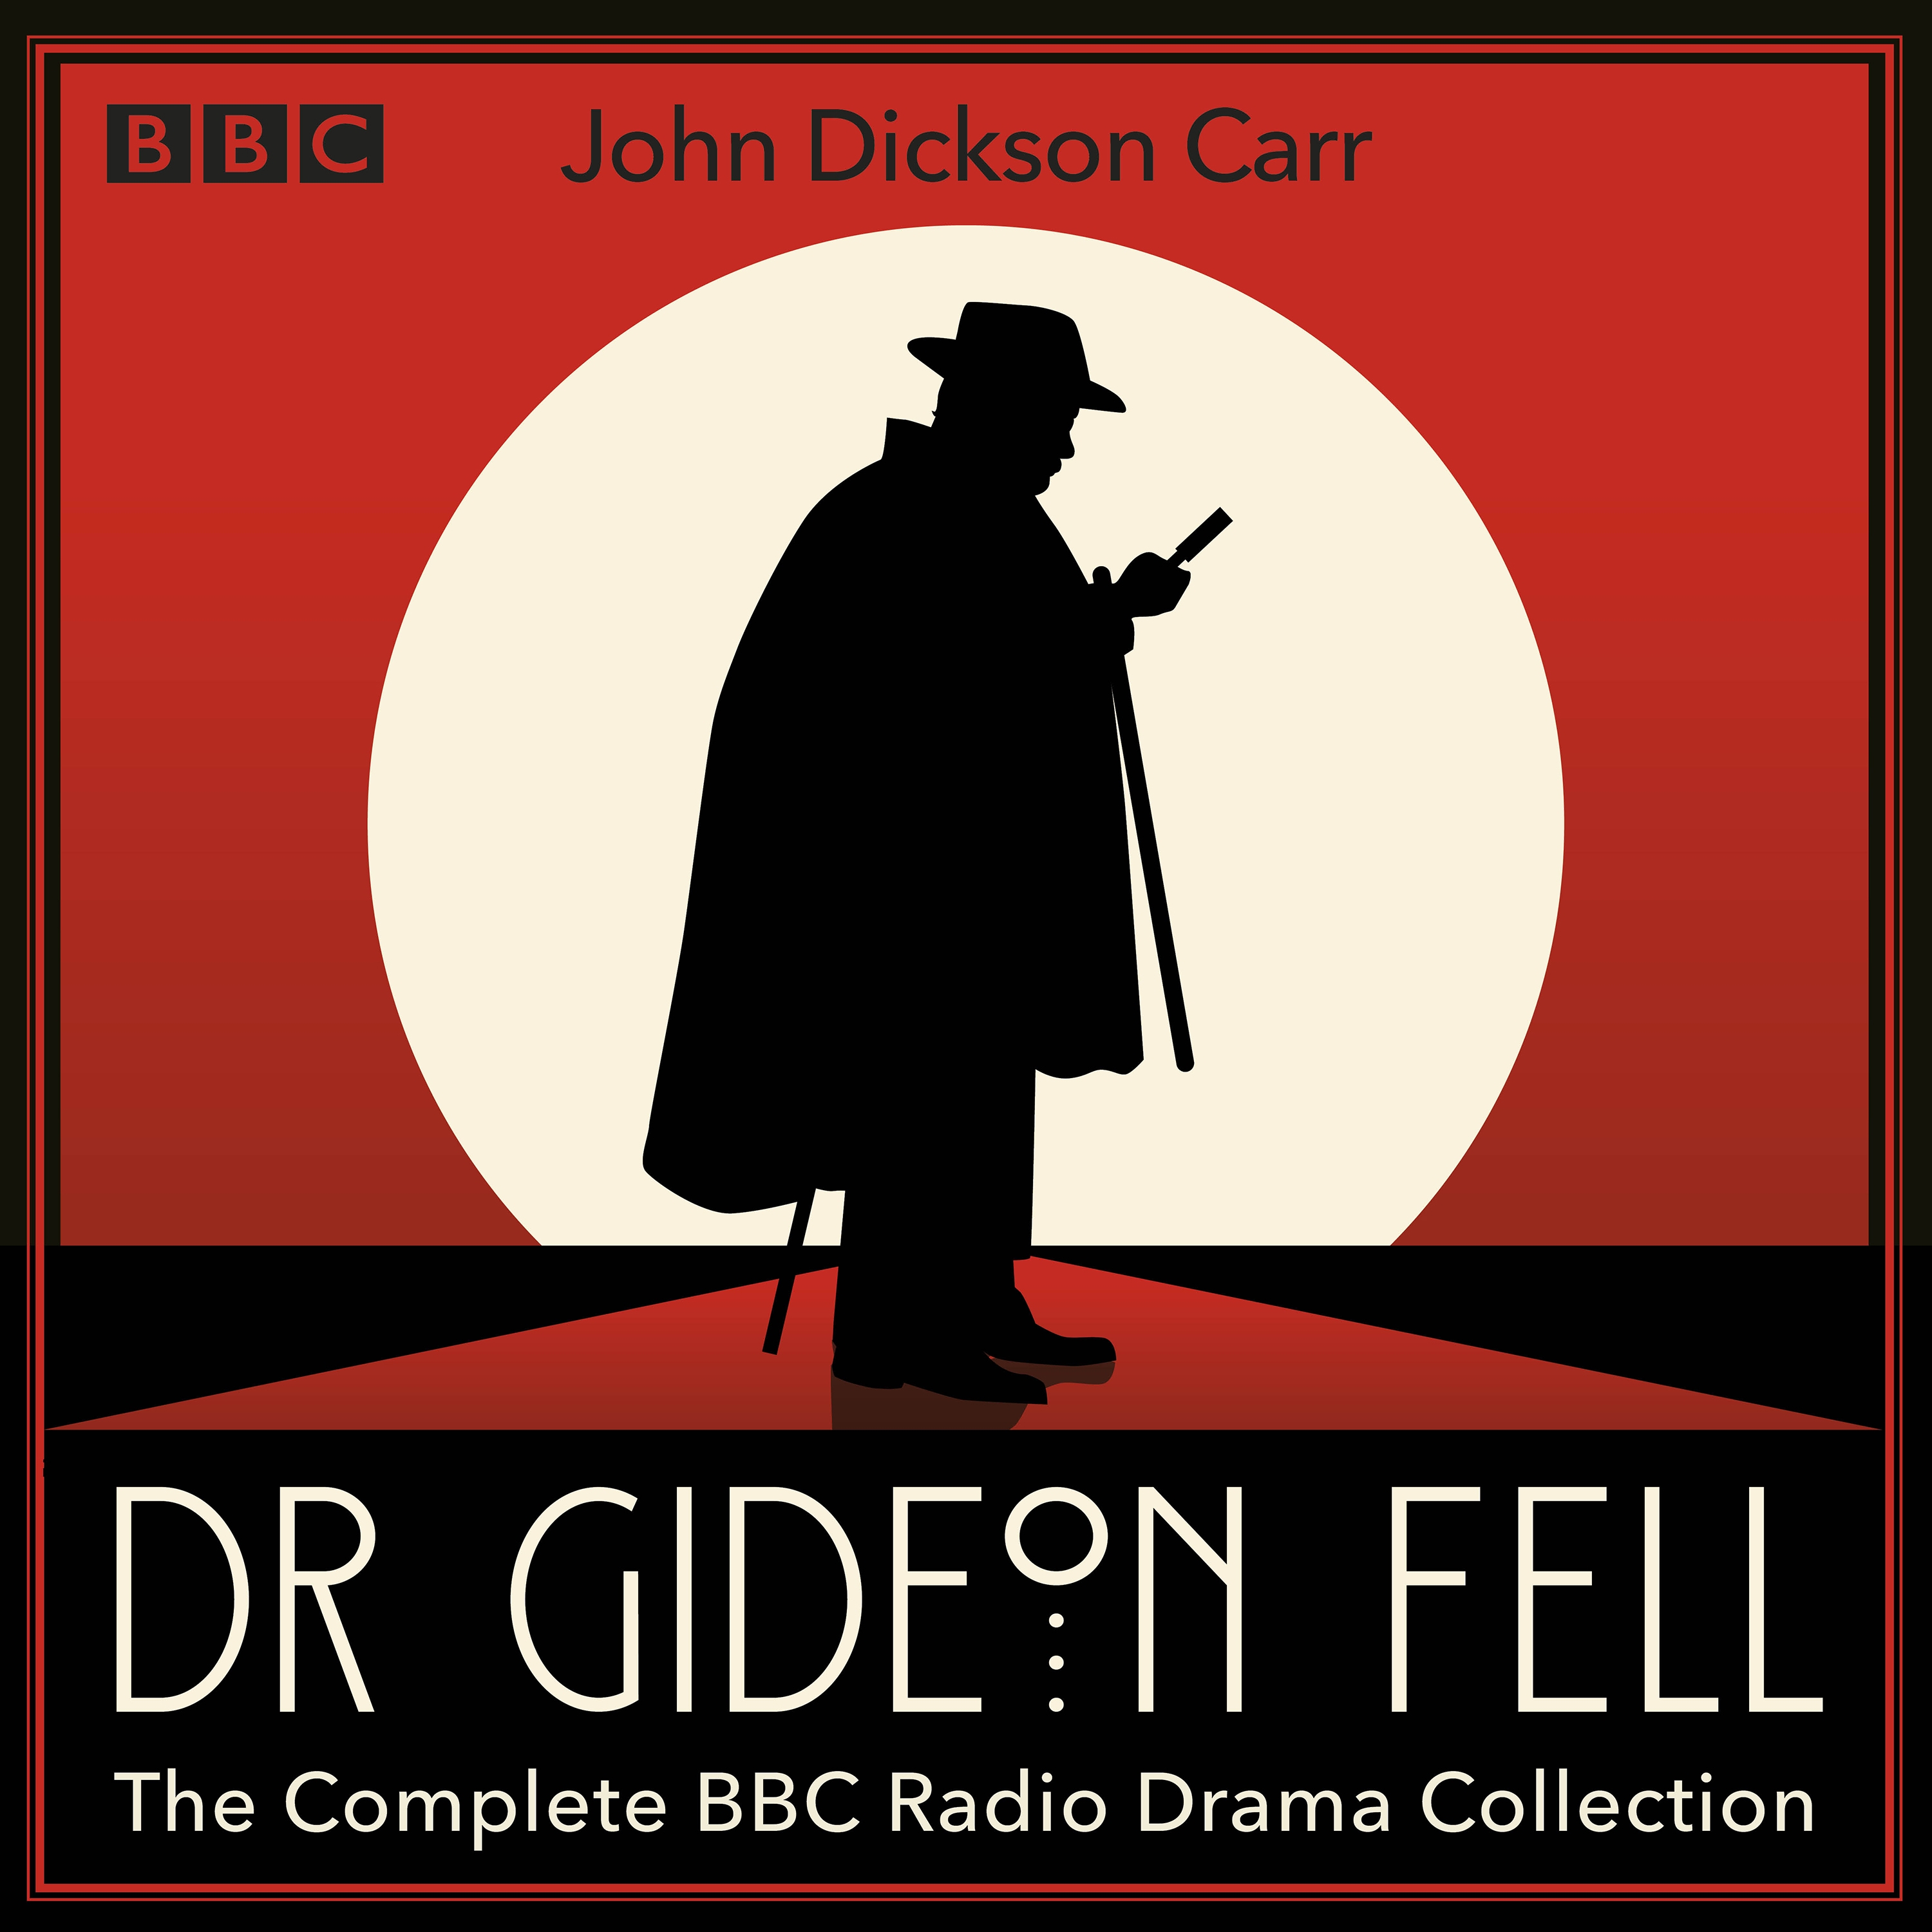 Audiobook image for Dr Gideon Fell: a 1940s Noir-style cover with a red background, large sun setting, and casting a silhouette of the title character. The title is below this in cream font.